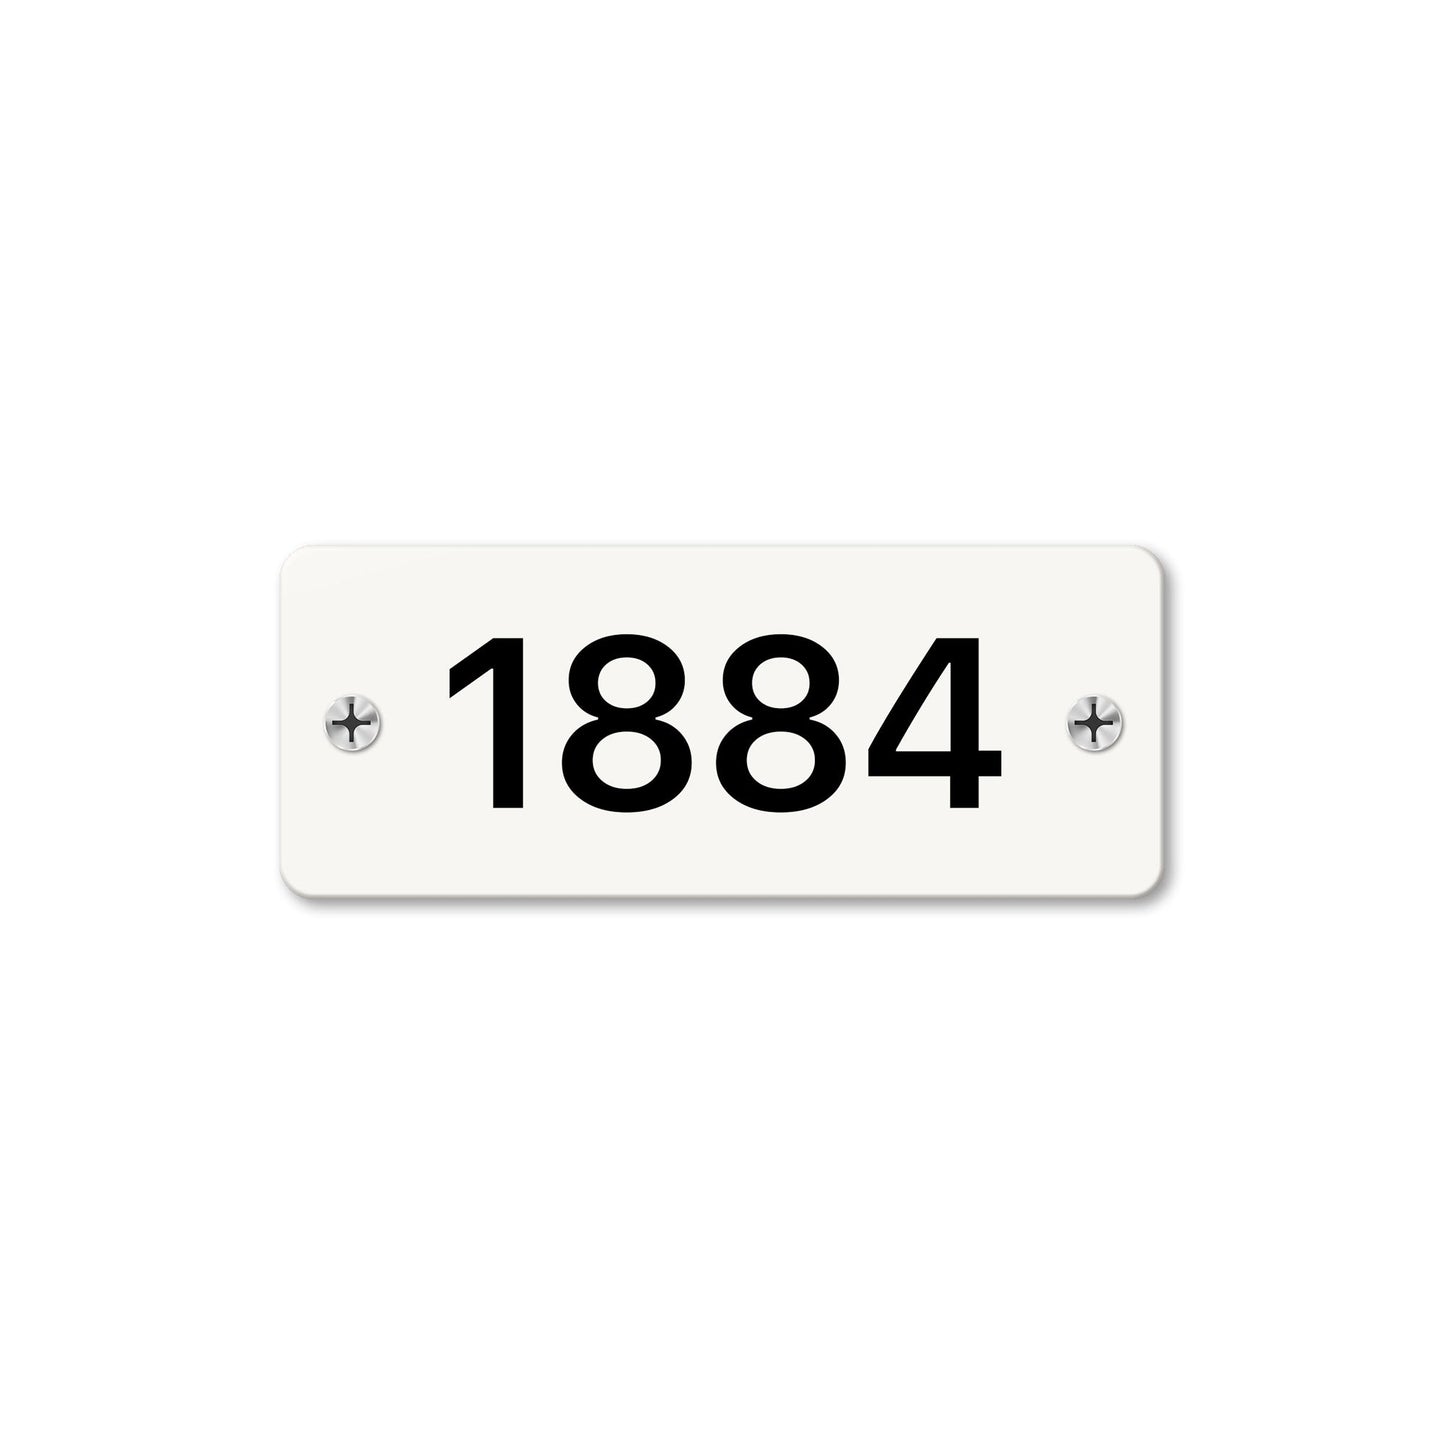 Numeral 1884